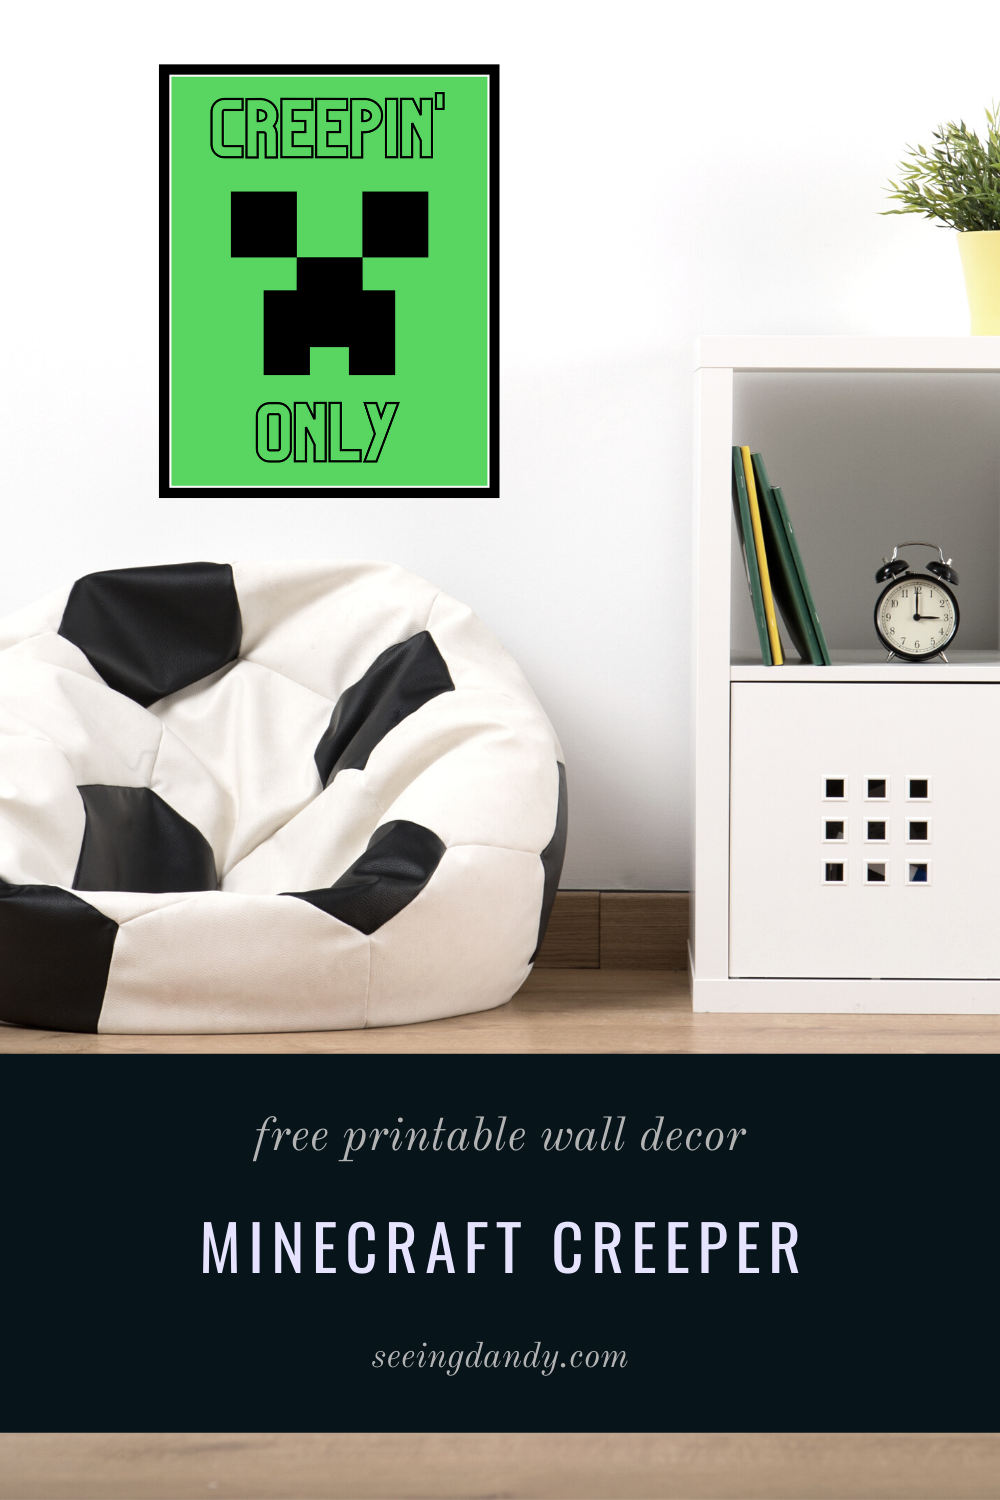 minecraft creeper printable, minecraft bedroom decor, minecraft poster, creepin only, free printable wall print, minecraft decorations, boys room, video gaming room, soccer bean bag chair, kids bedroom decorating, minecraft decor ideas